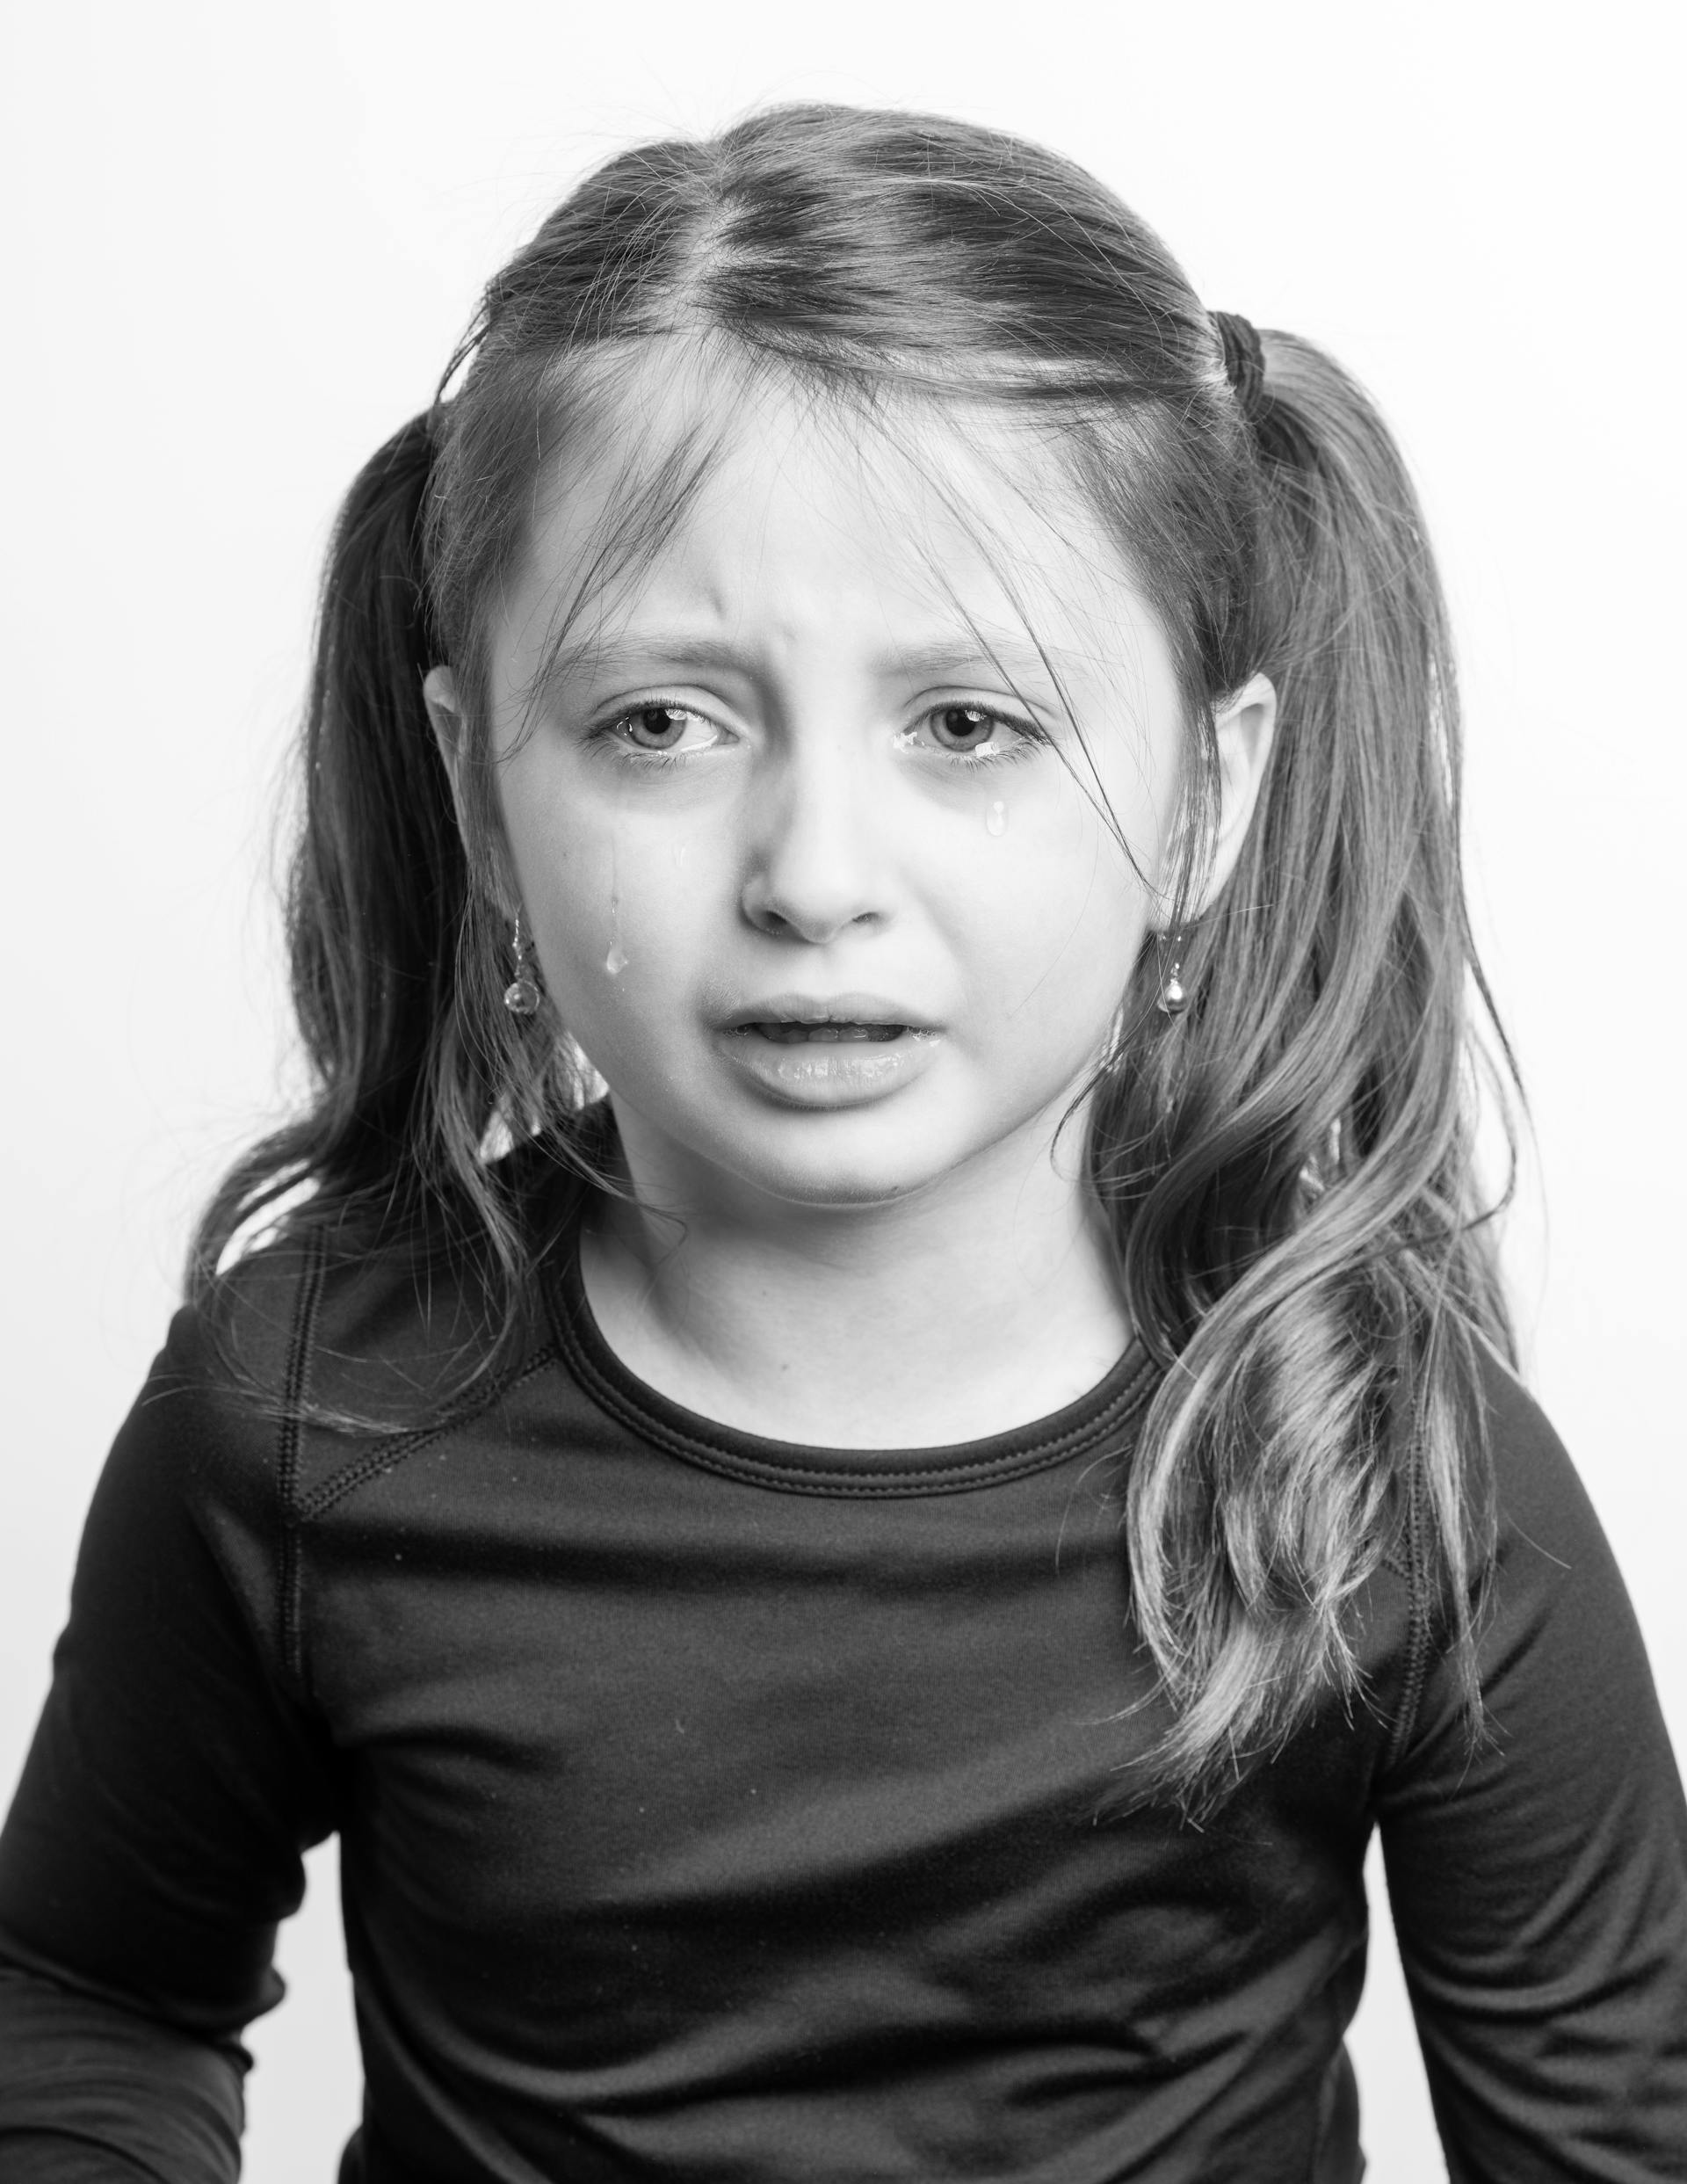 A grayscale photo of a little girl crying | Source: Pexels